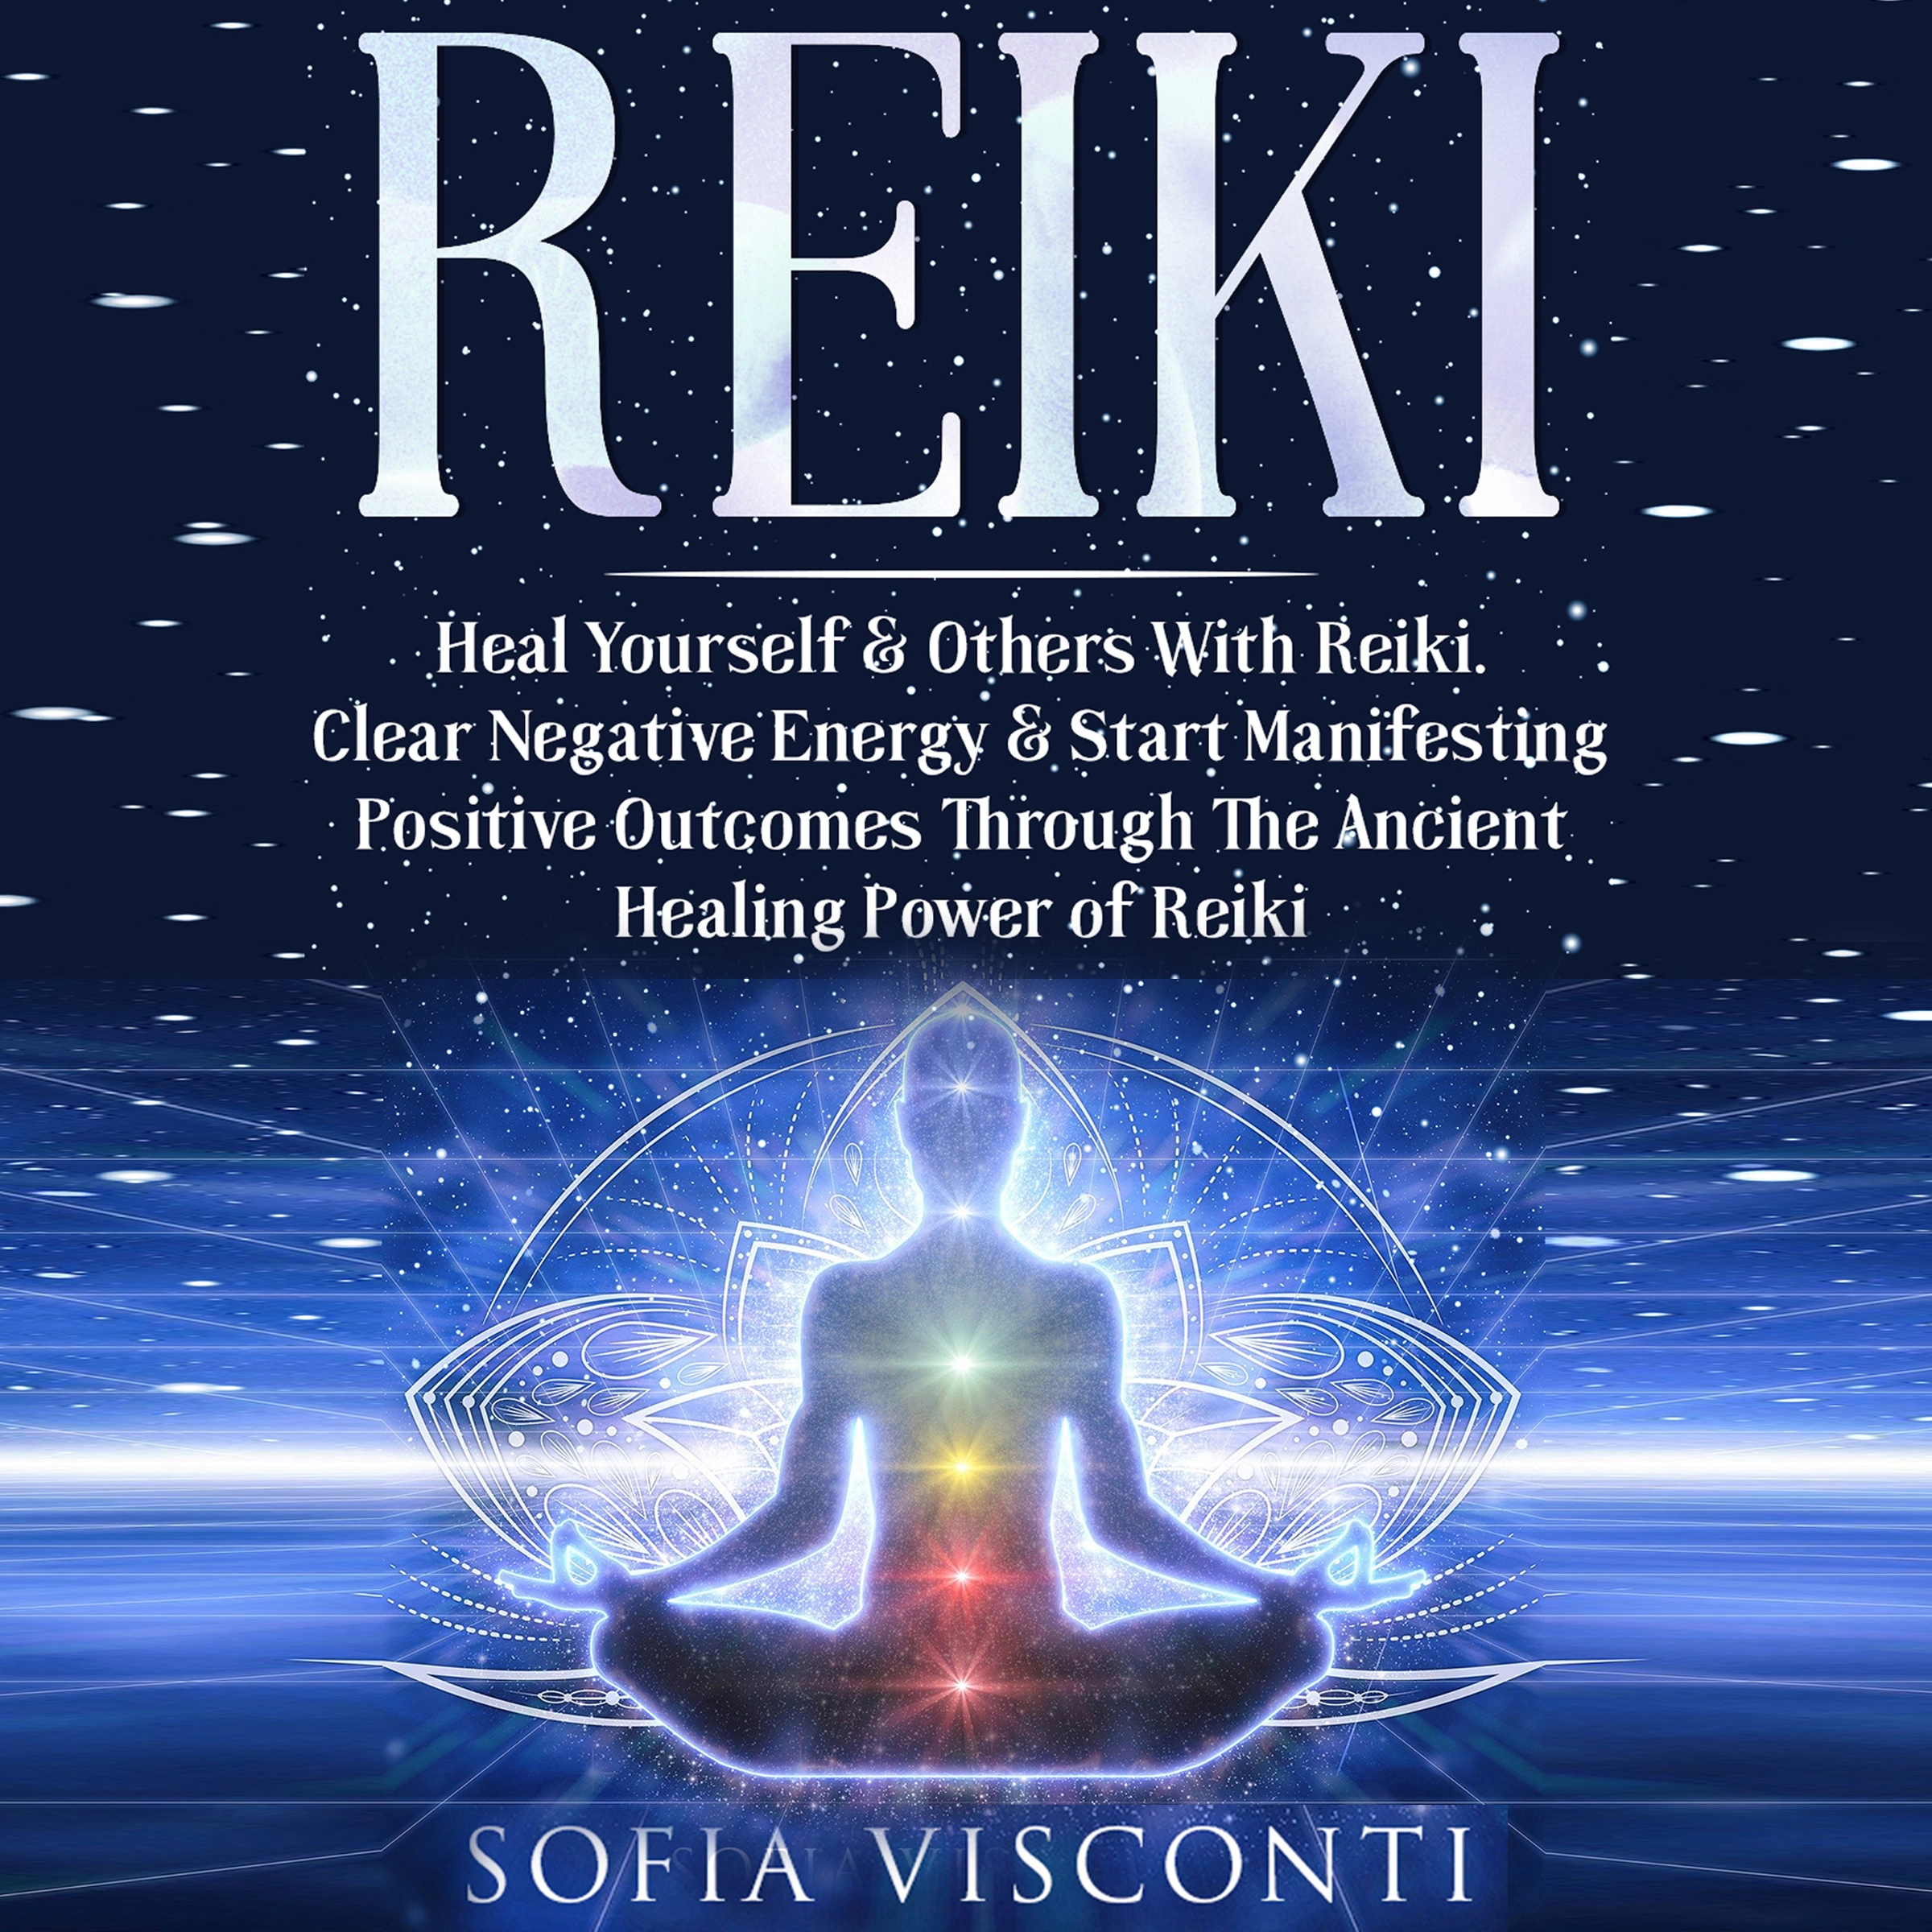 Reiki: Heal Yourself & Others With Reiki Audiobook by Sofia Visconti